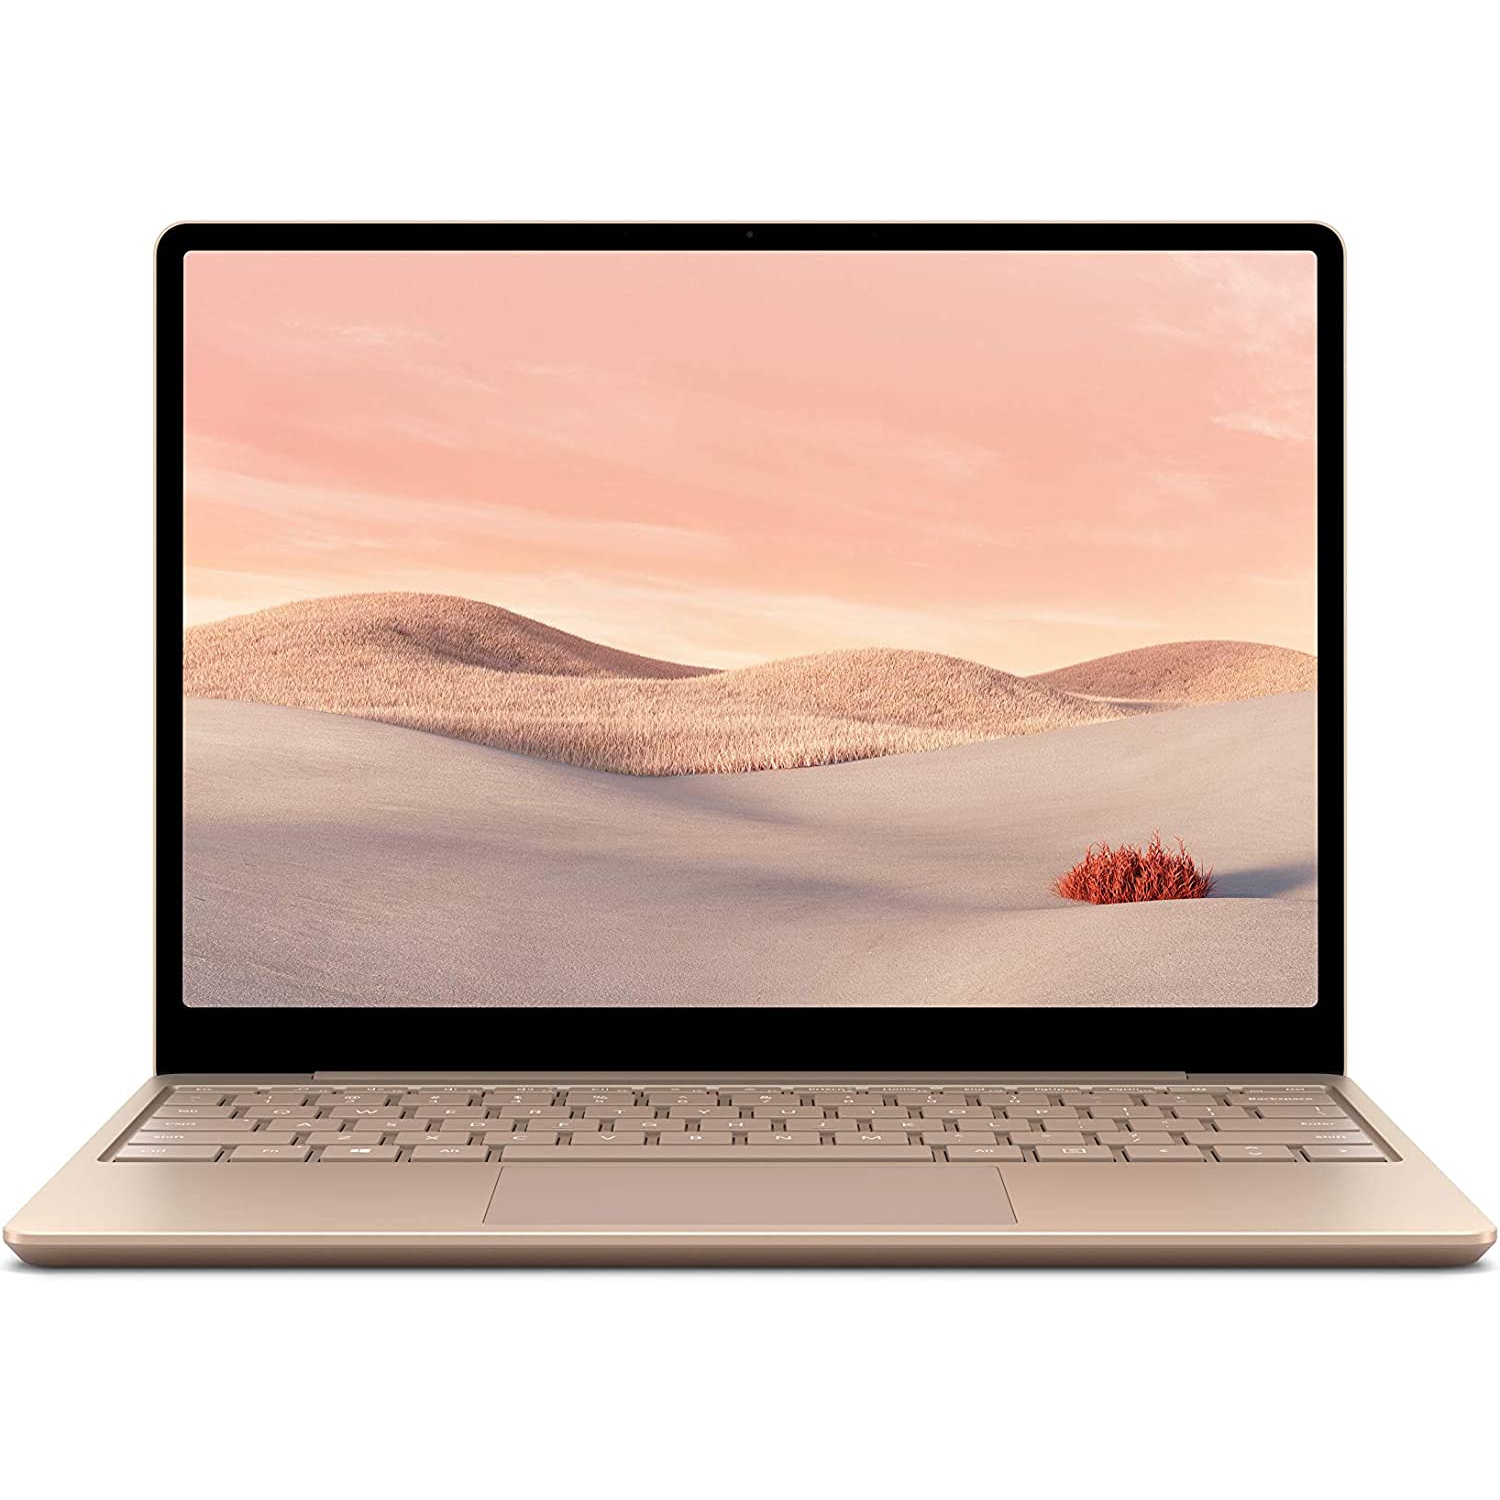 Refurbished (Excellent) Microsoft Surface Laptop Go 12.4" Touchscreen, Intel i5-1035G1, 8GB RAM, 256GB SSD, W10H-S MODE, Sandstone, 21D-00003